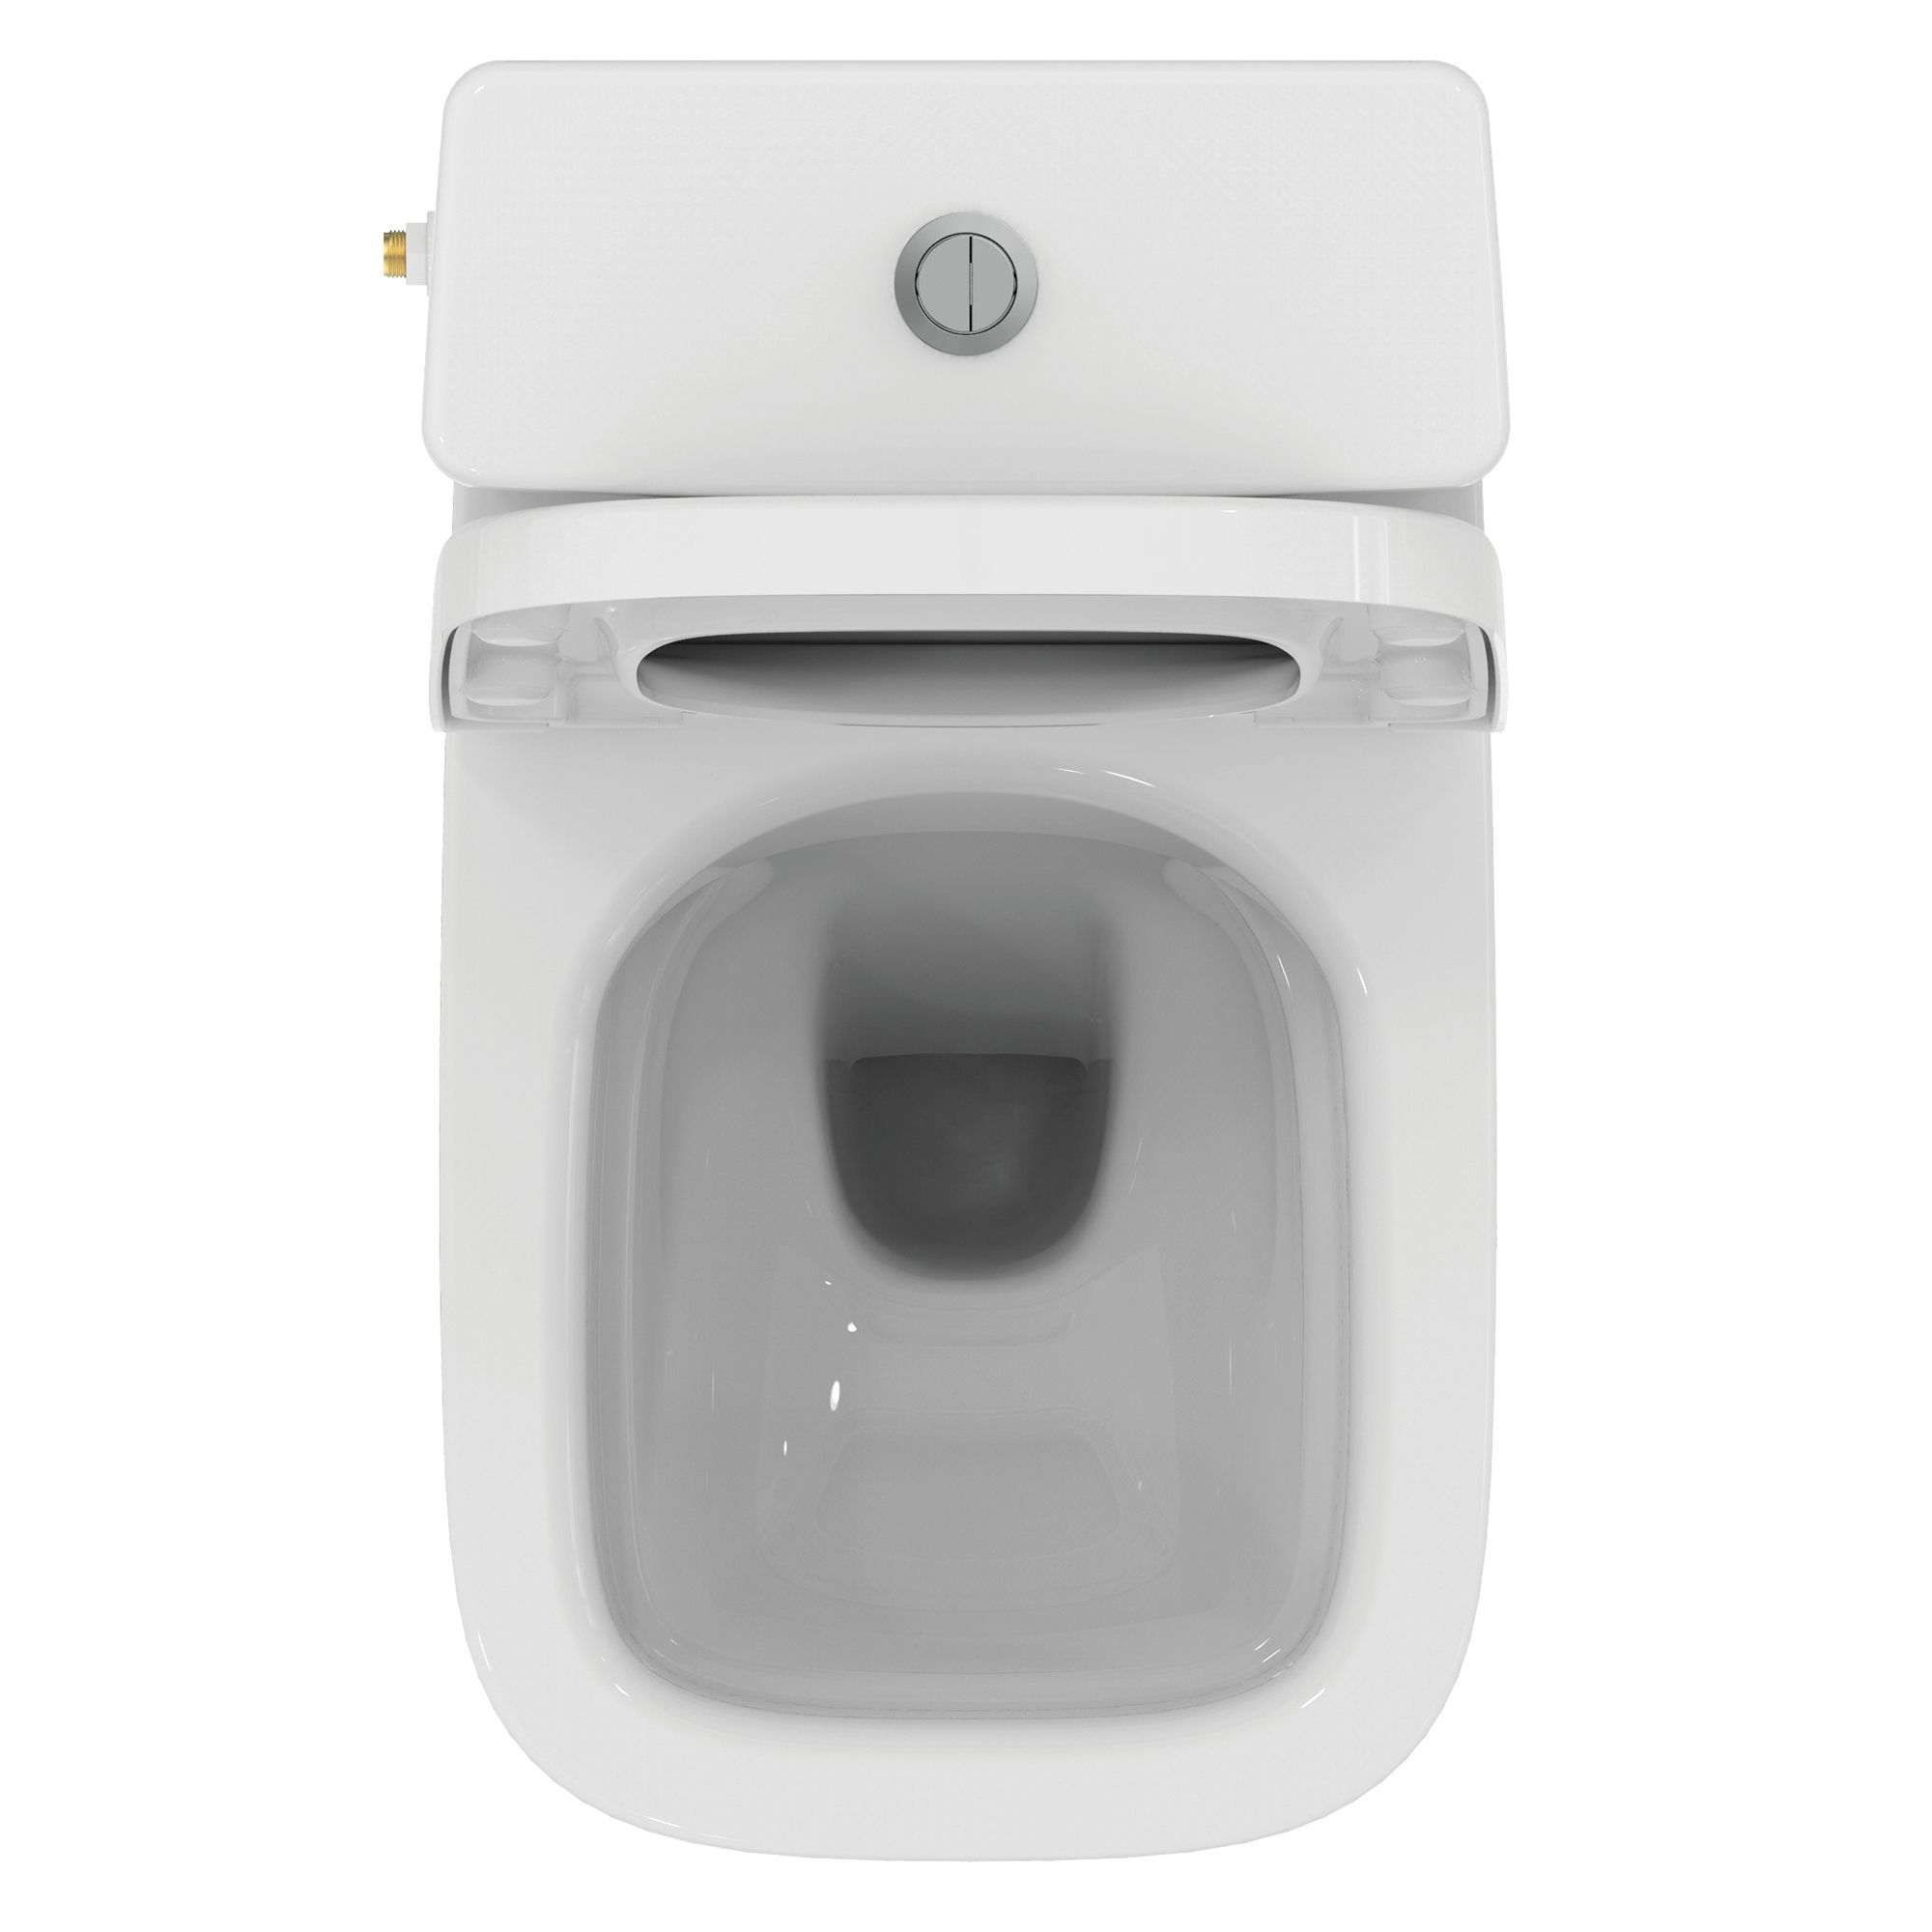 Ideal Standard i.life A White Standard Back to wall close-coupled Square Toilet set with Soft close seat